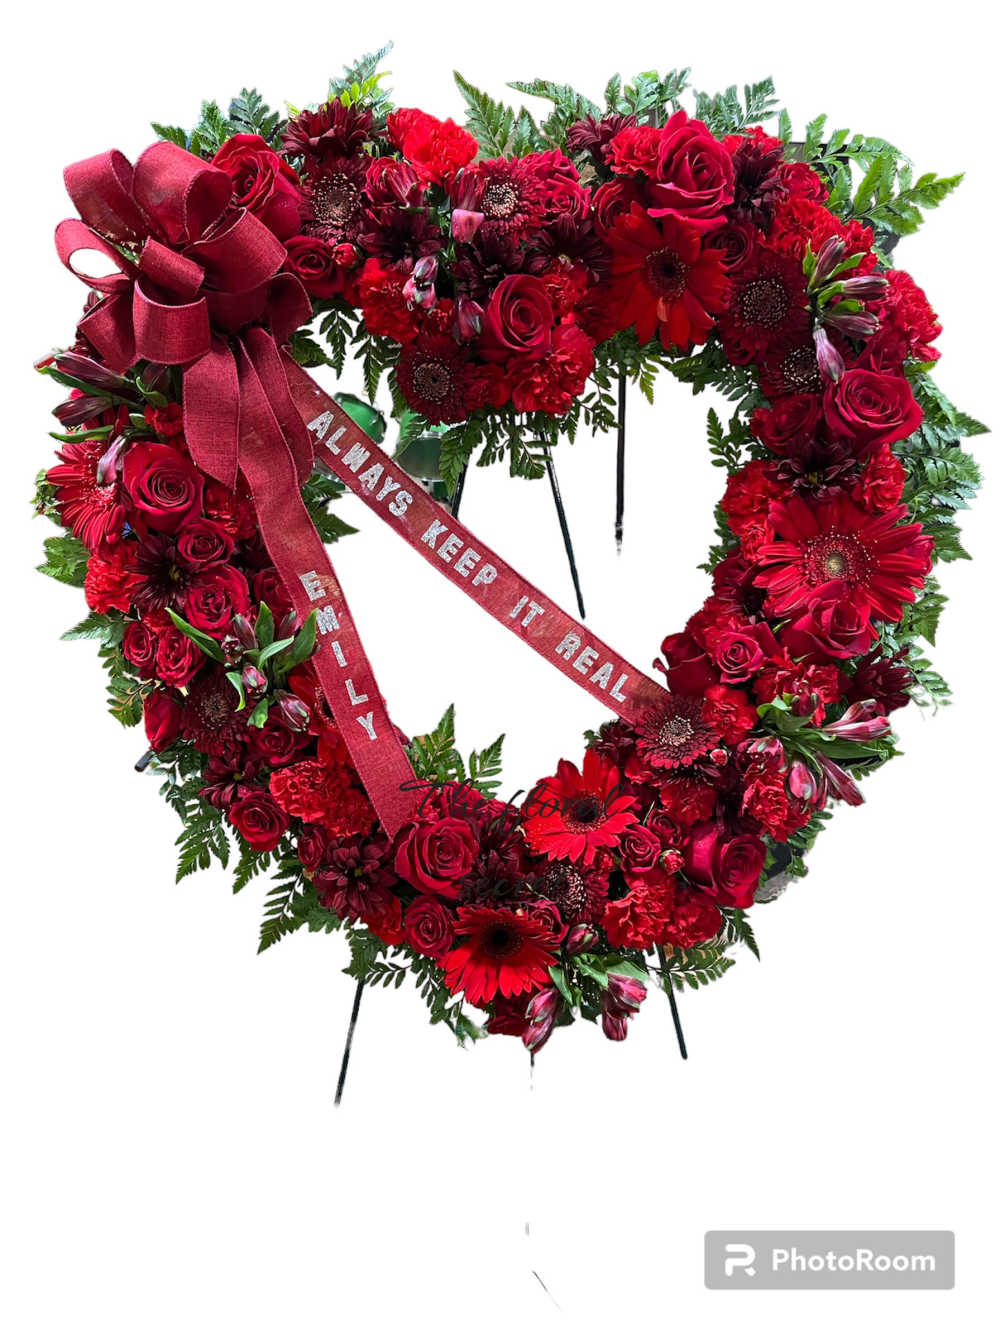 heart shaped wreath all in red ,Roses, Gerbera daisy, alstroemeria, poms, 